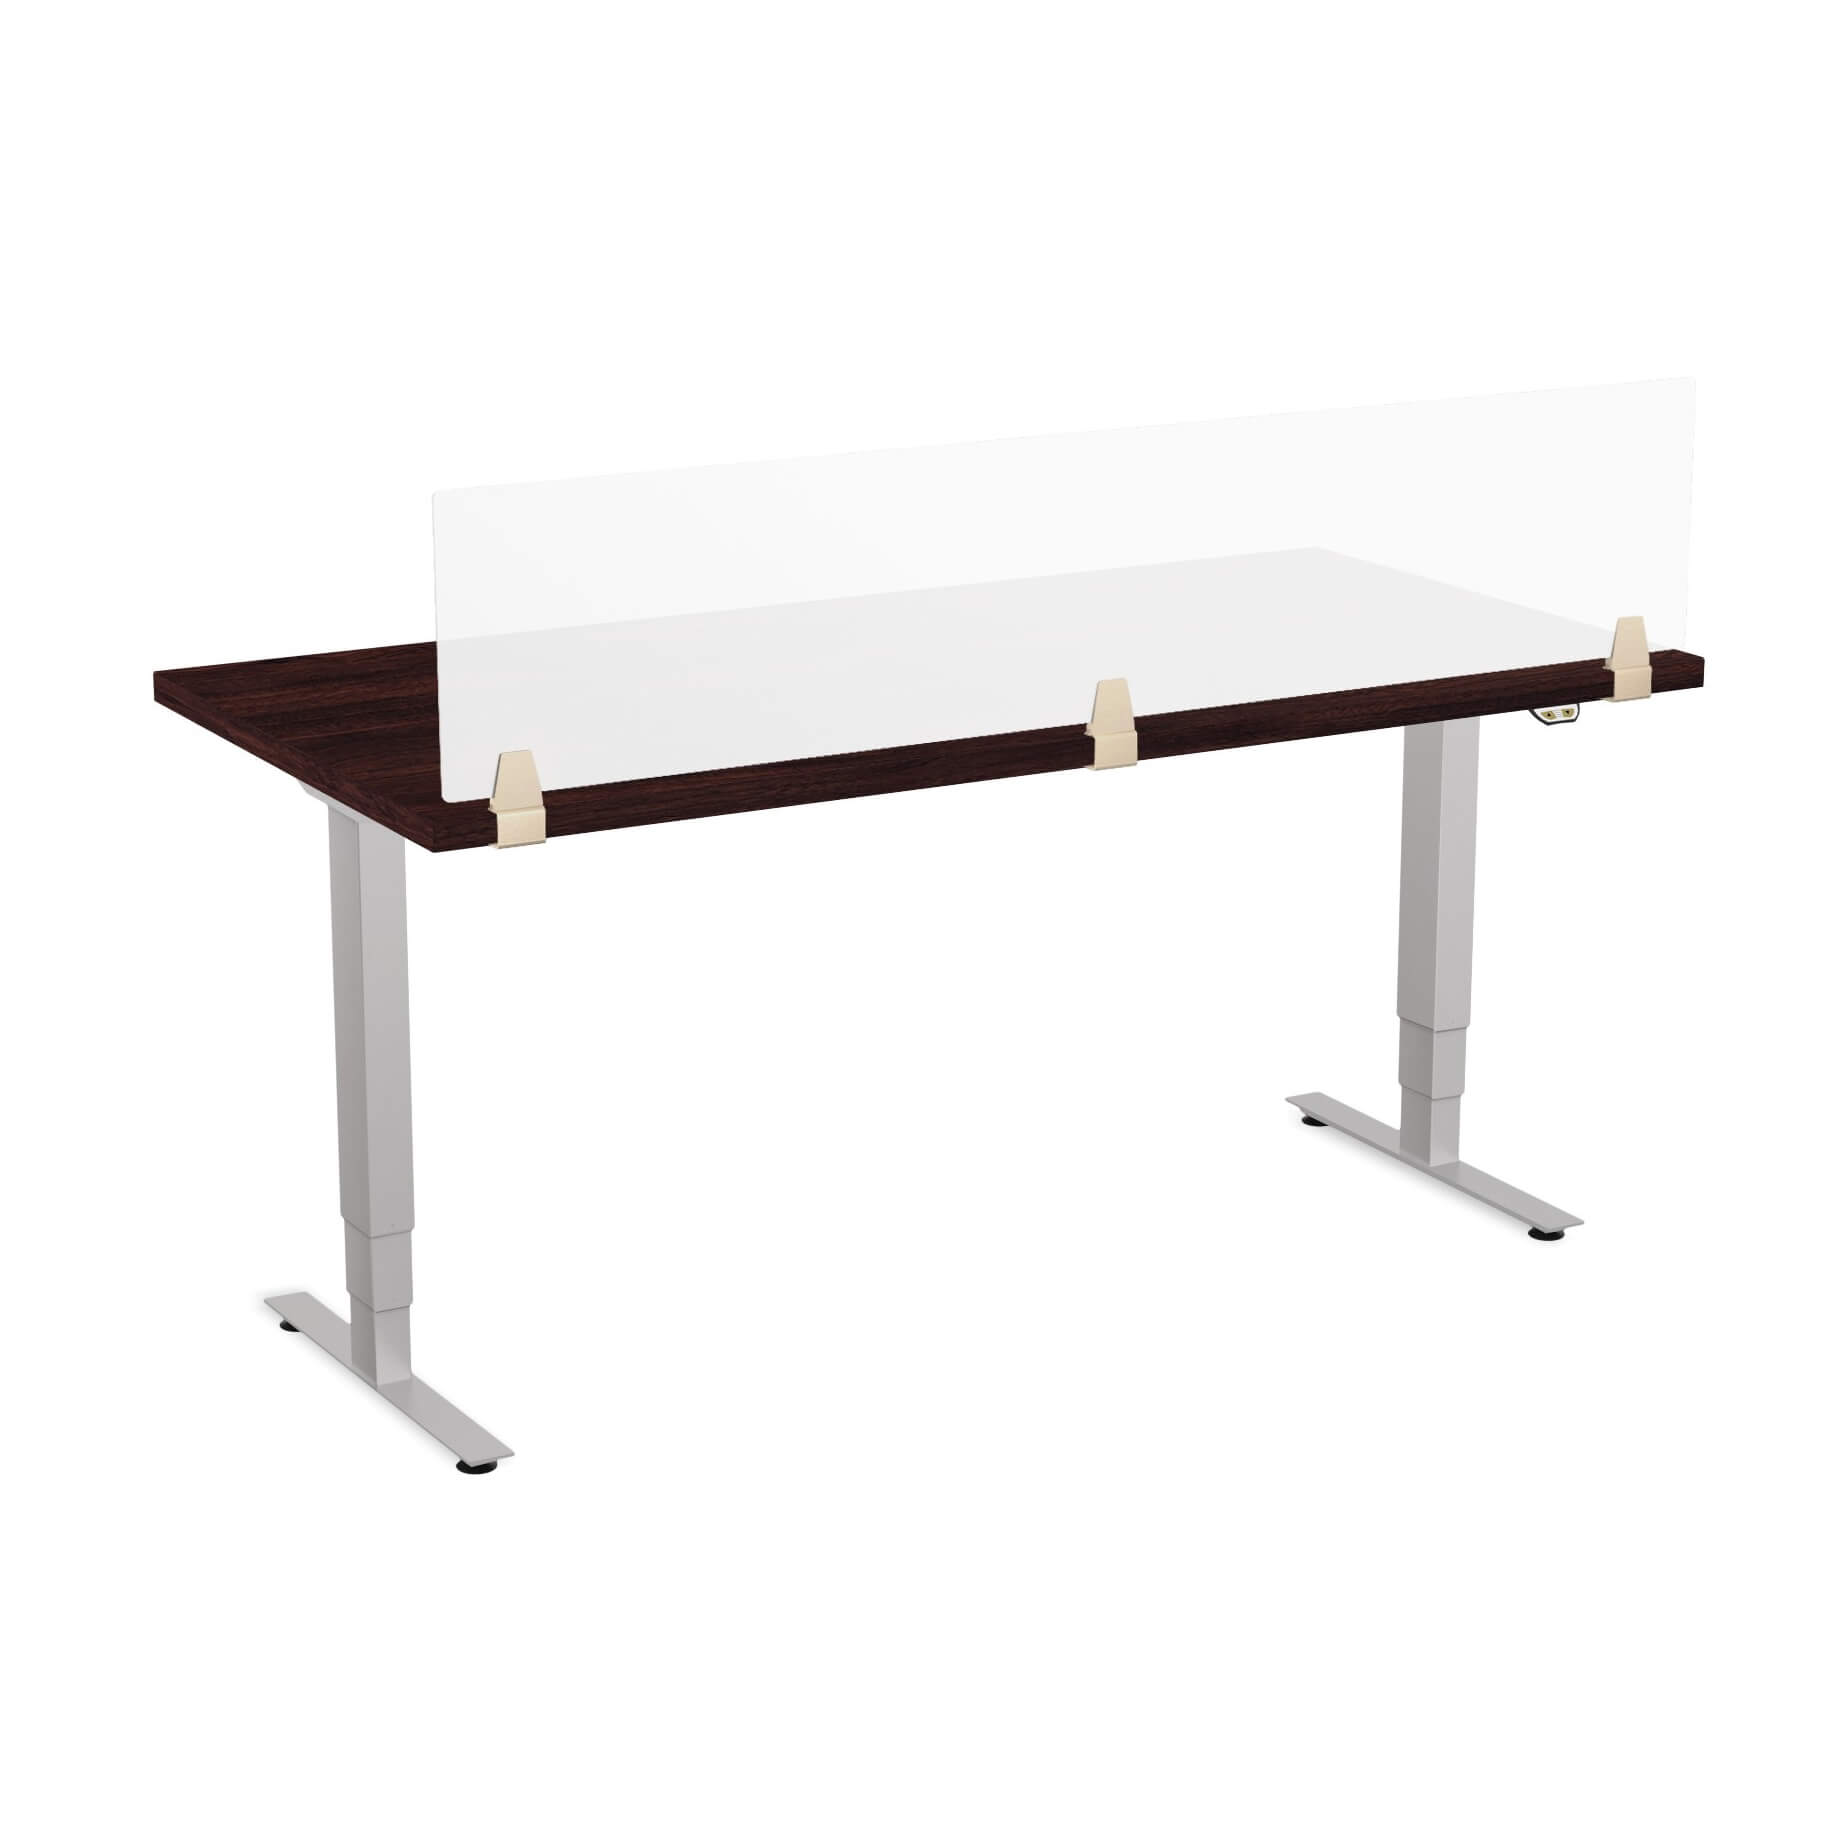 sit-stand-desk-height-adjustable-table-electric-1-2.jpg